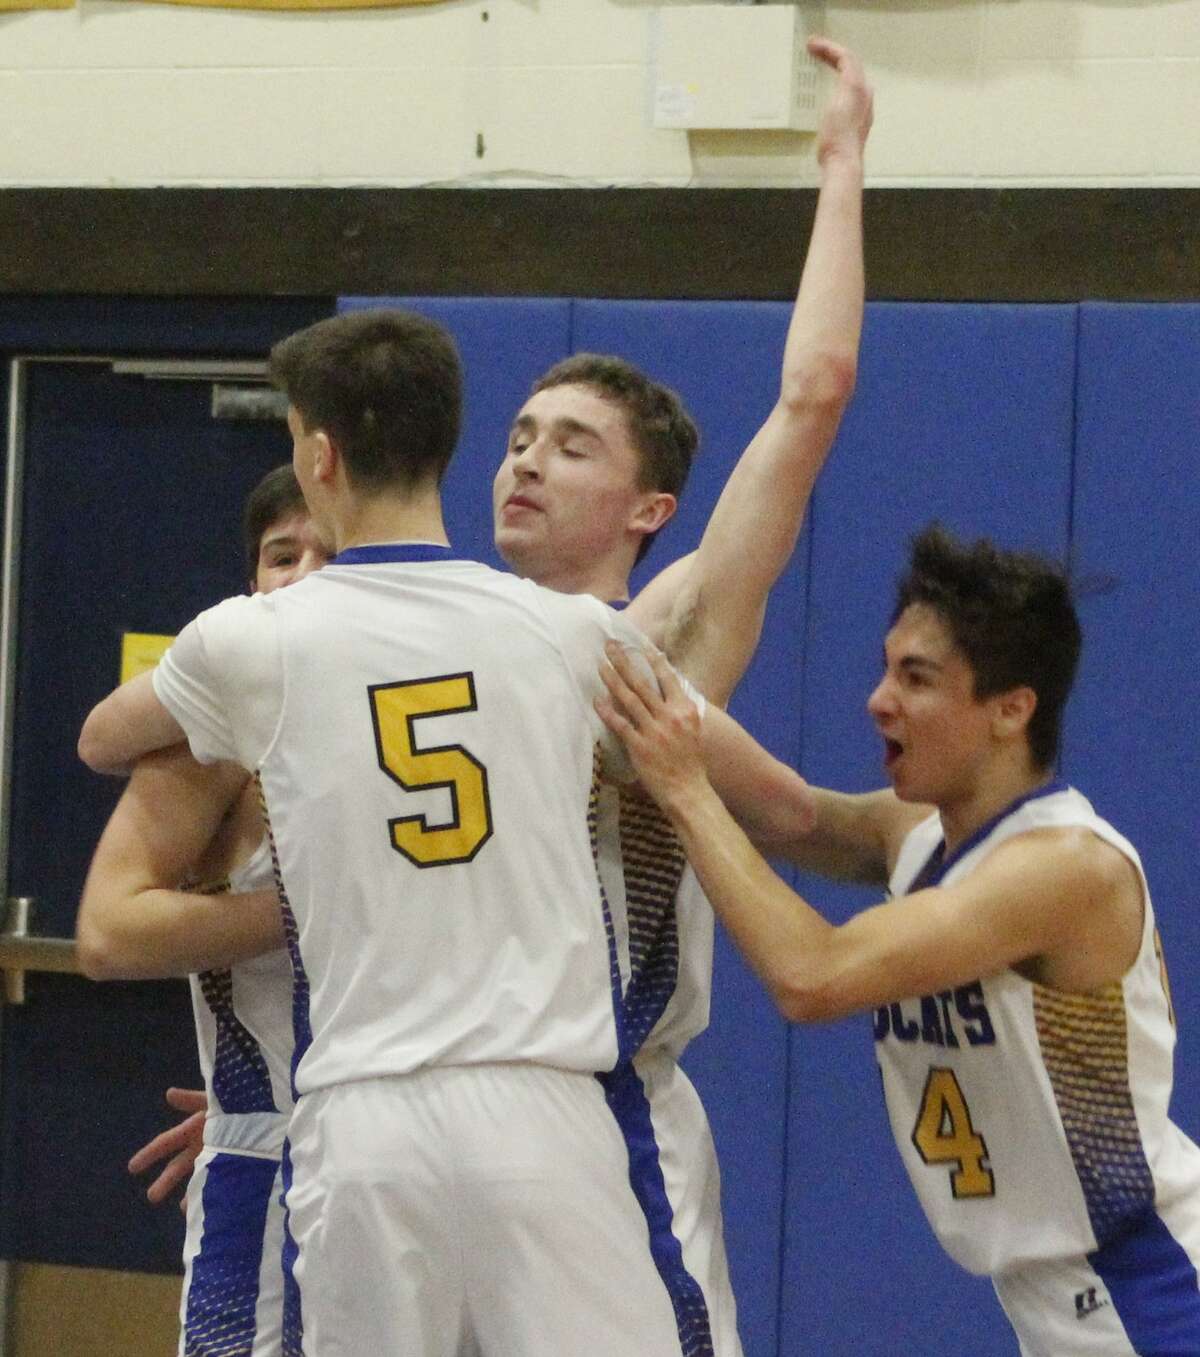 Brookfield High School boys basketball players celebrate with Cam Gleichauf, center, after Gleichauf's last-second shot lifted the Bobcats to an overtime victory over Immaculate at Brookfield High School Jan. 30, 2018.